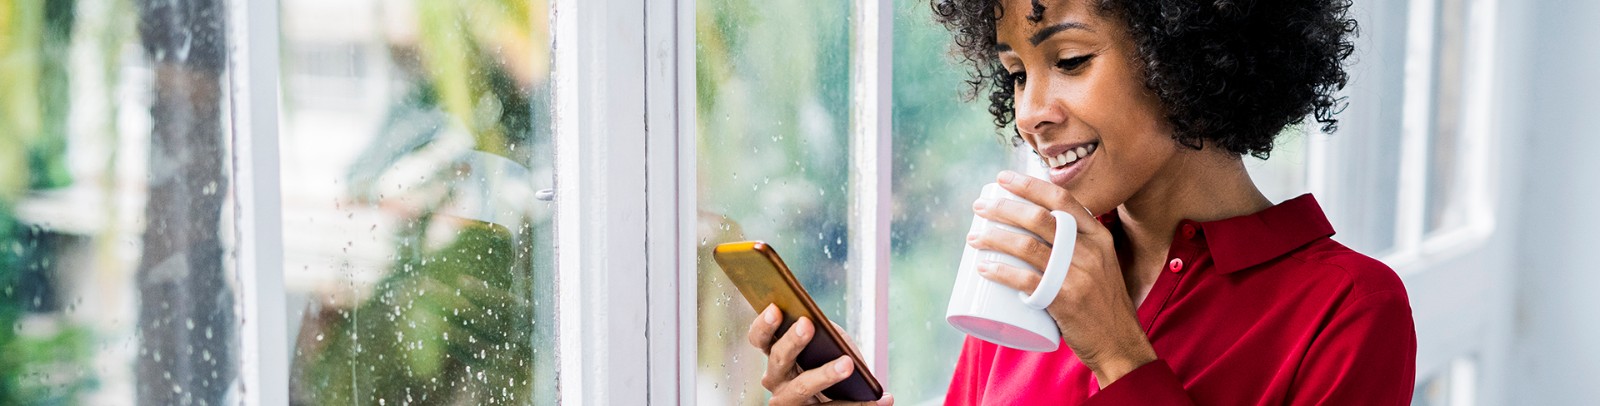 Woman drinking coffee and looking at cellphone while it rains outside